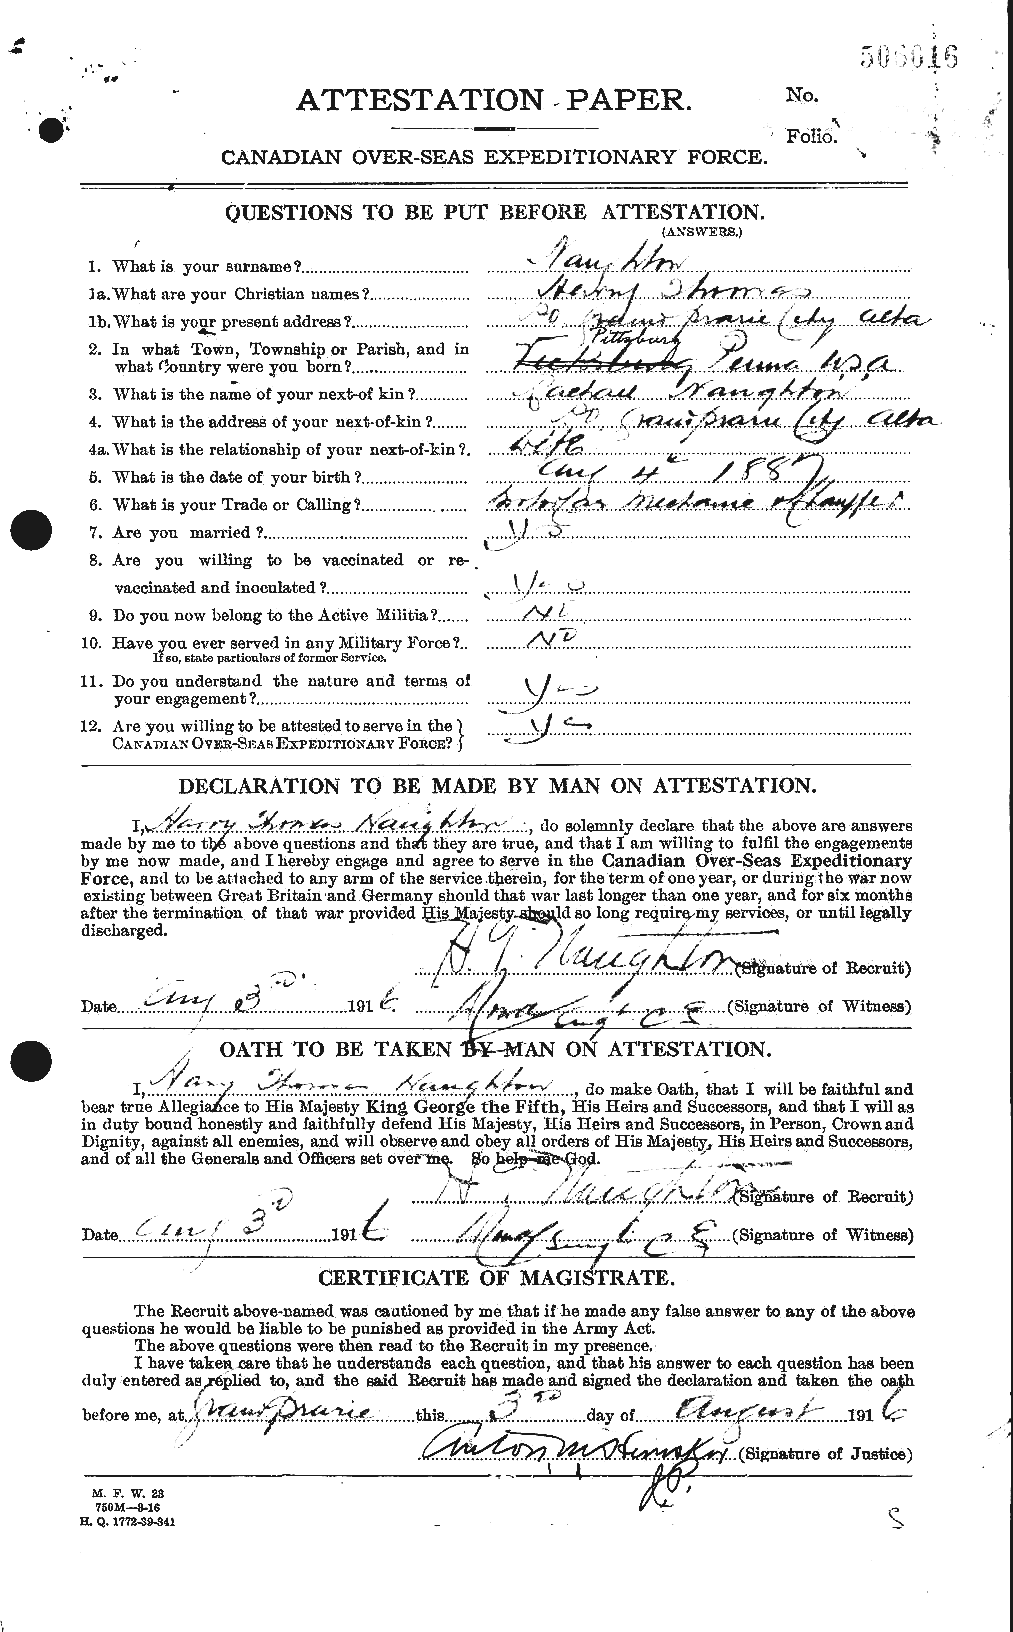 Personnel Records of the First World War - CEF 549205a